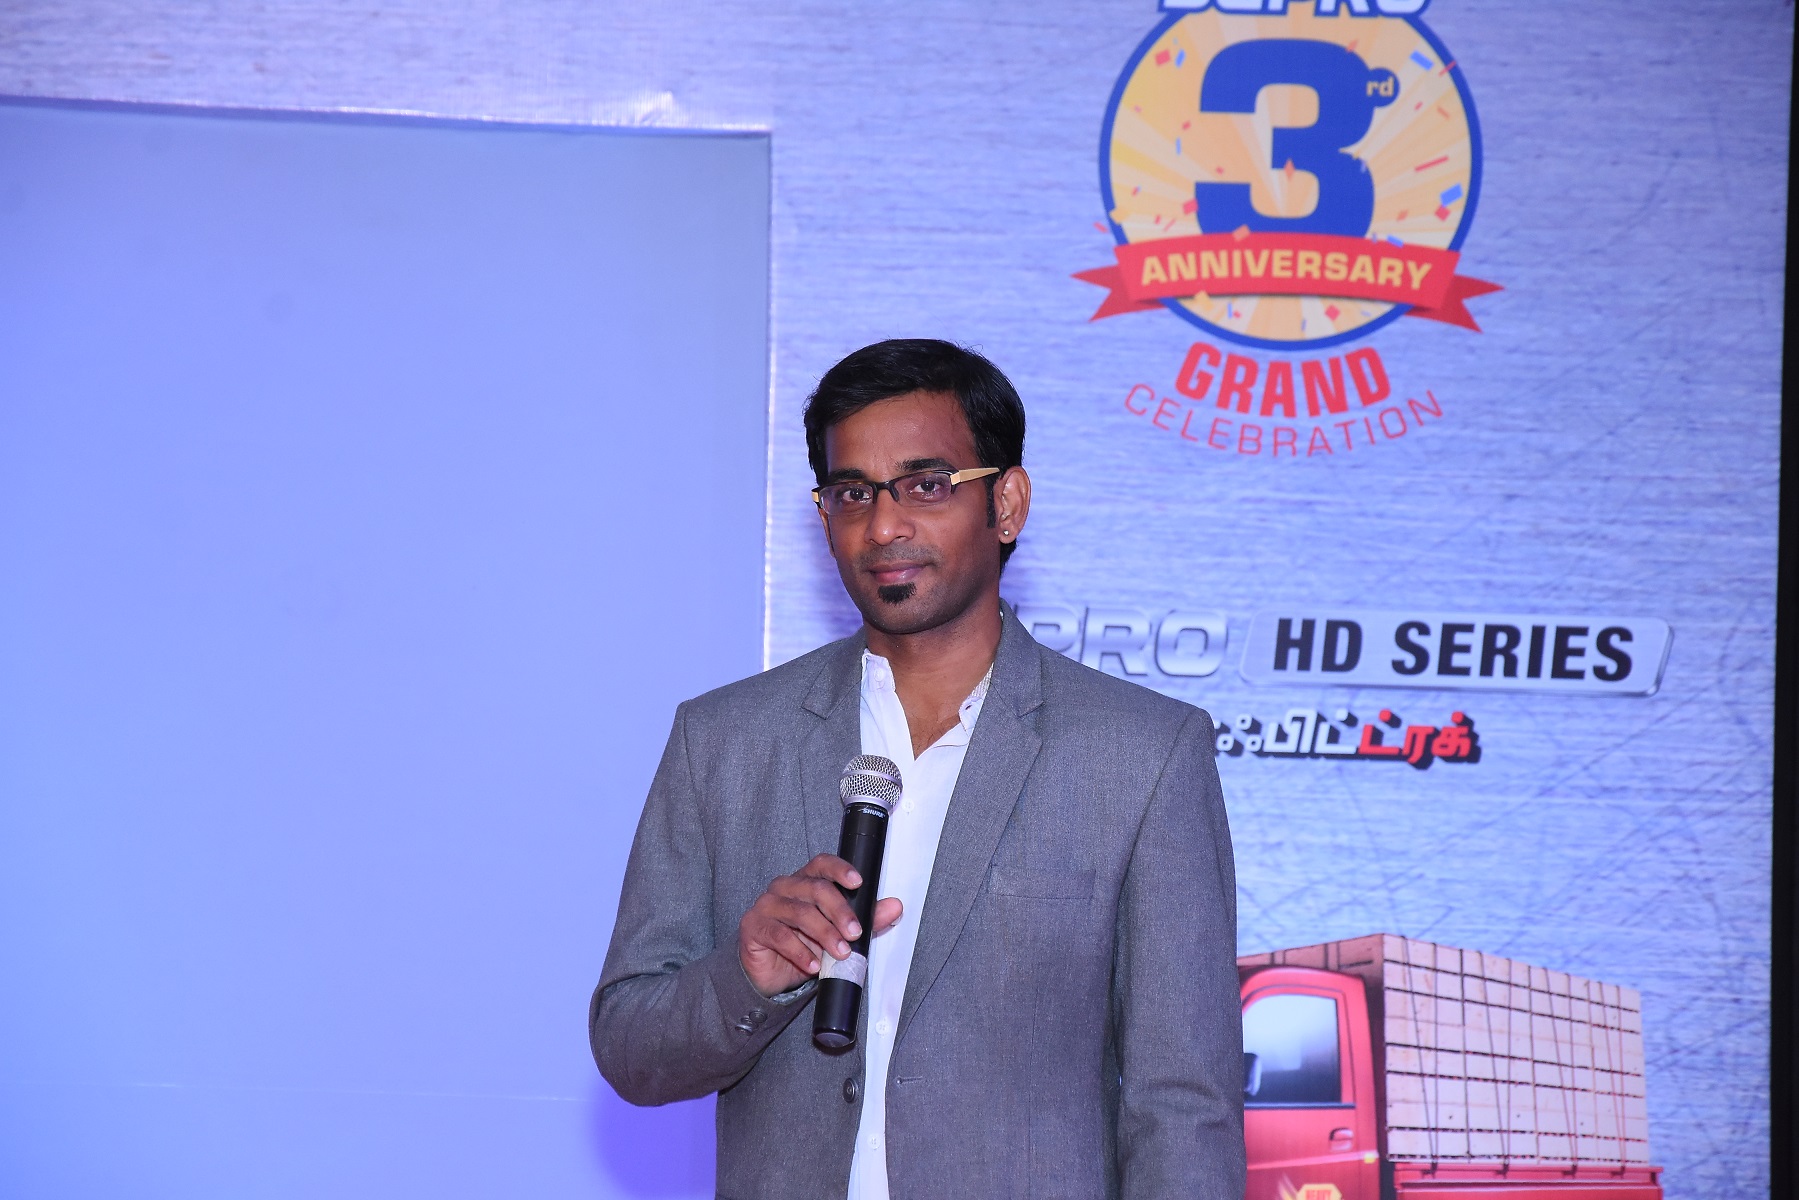 Chennai Male Emcee Thamizharasan hosting Corporate Product Launch Event